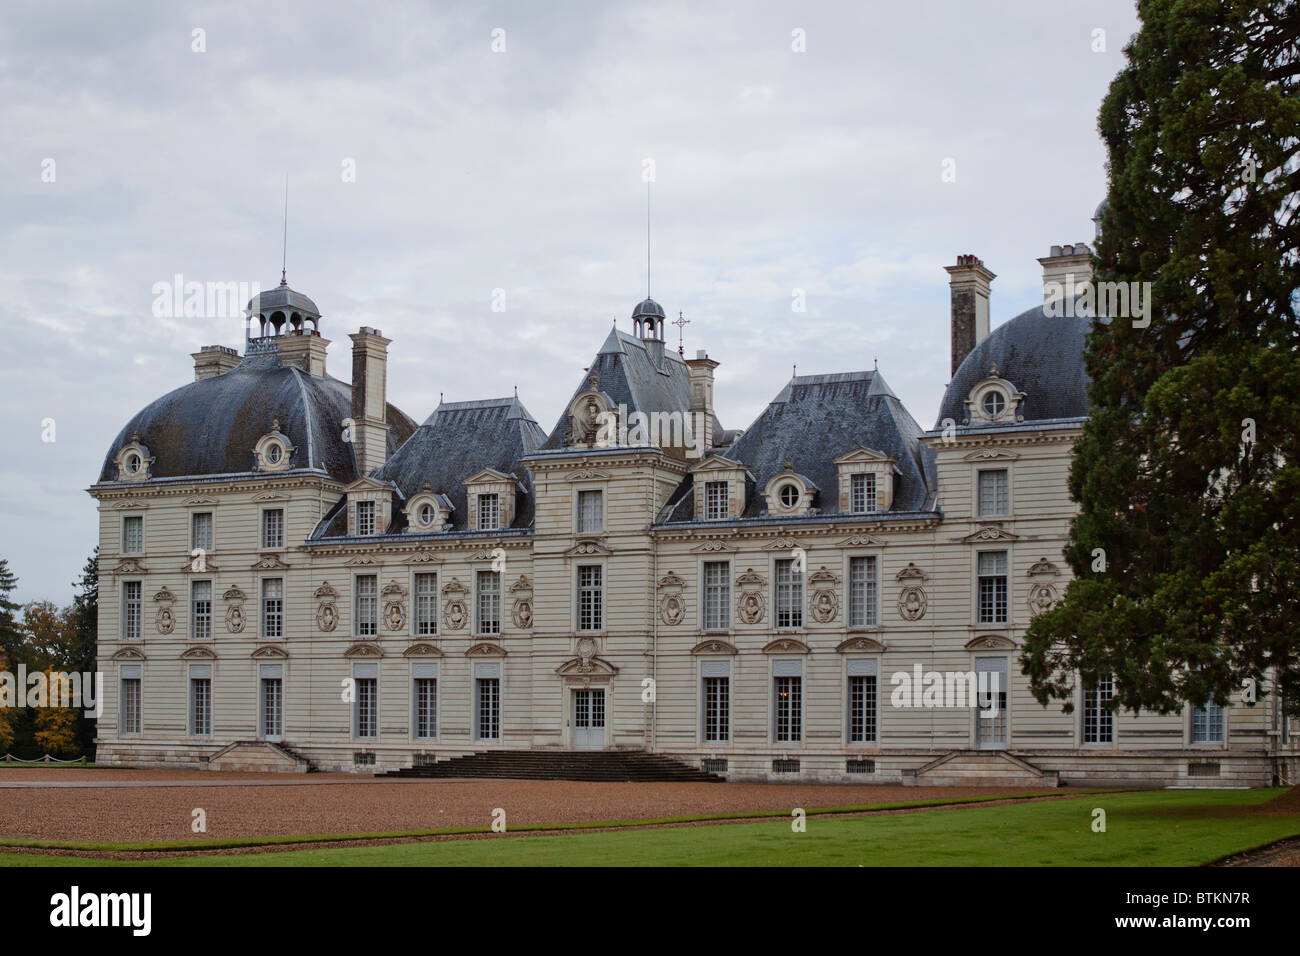 Cheverny Palace, France Banque D'Images